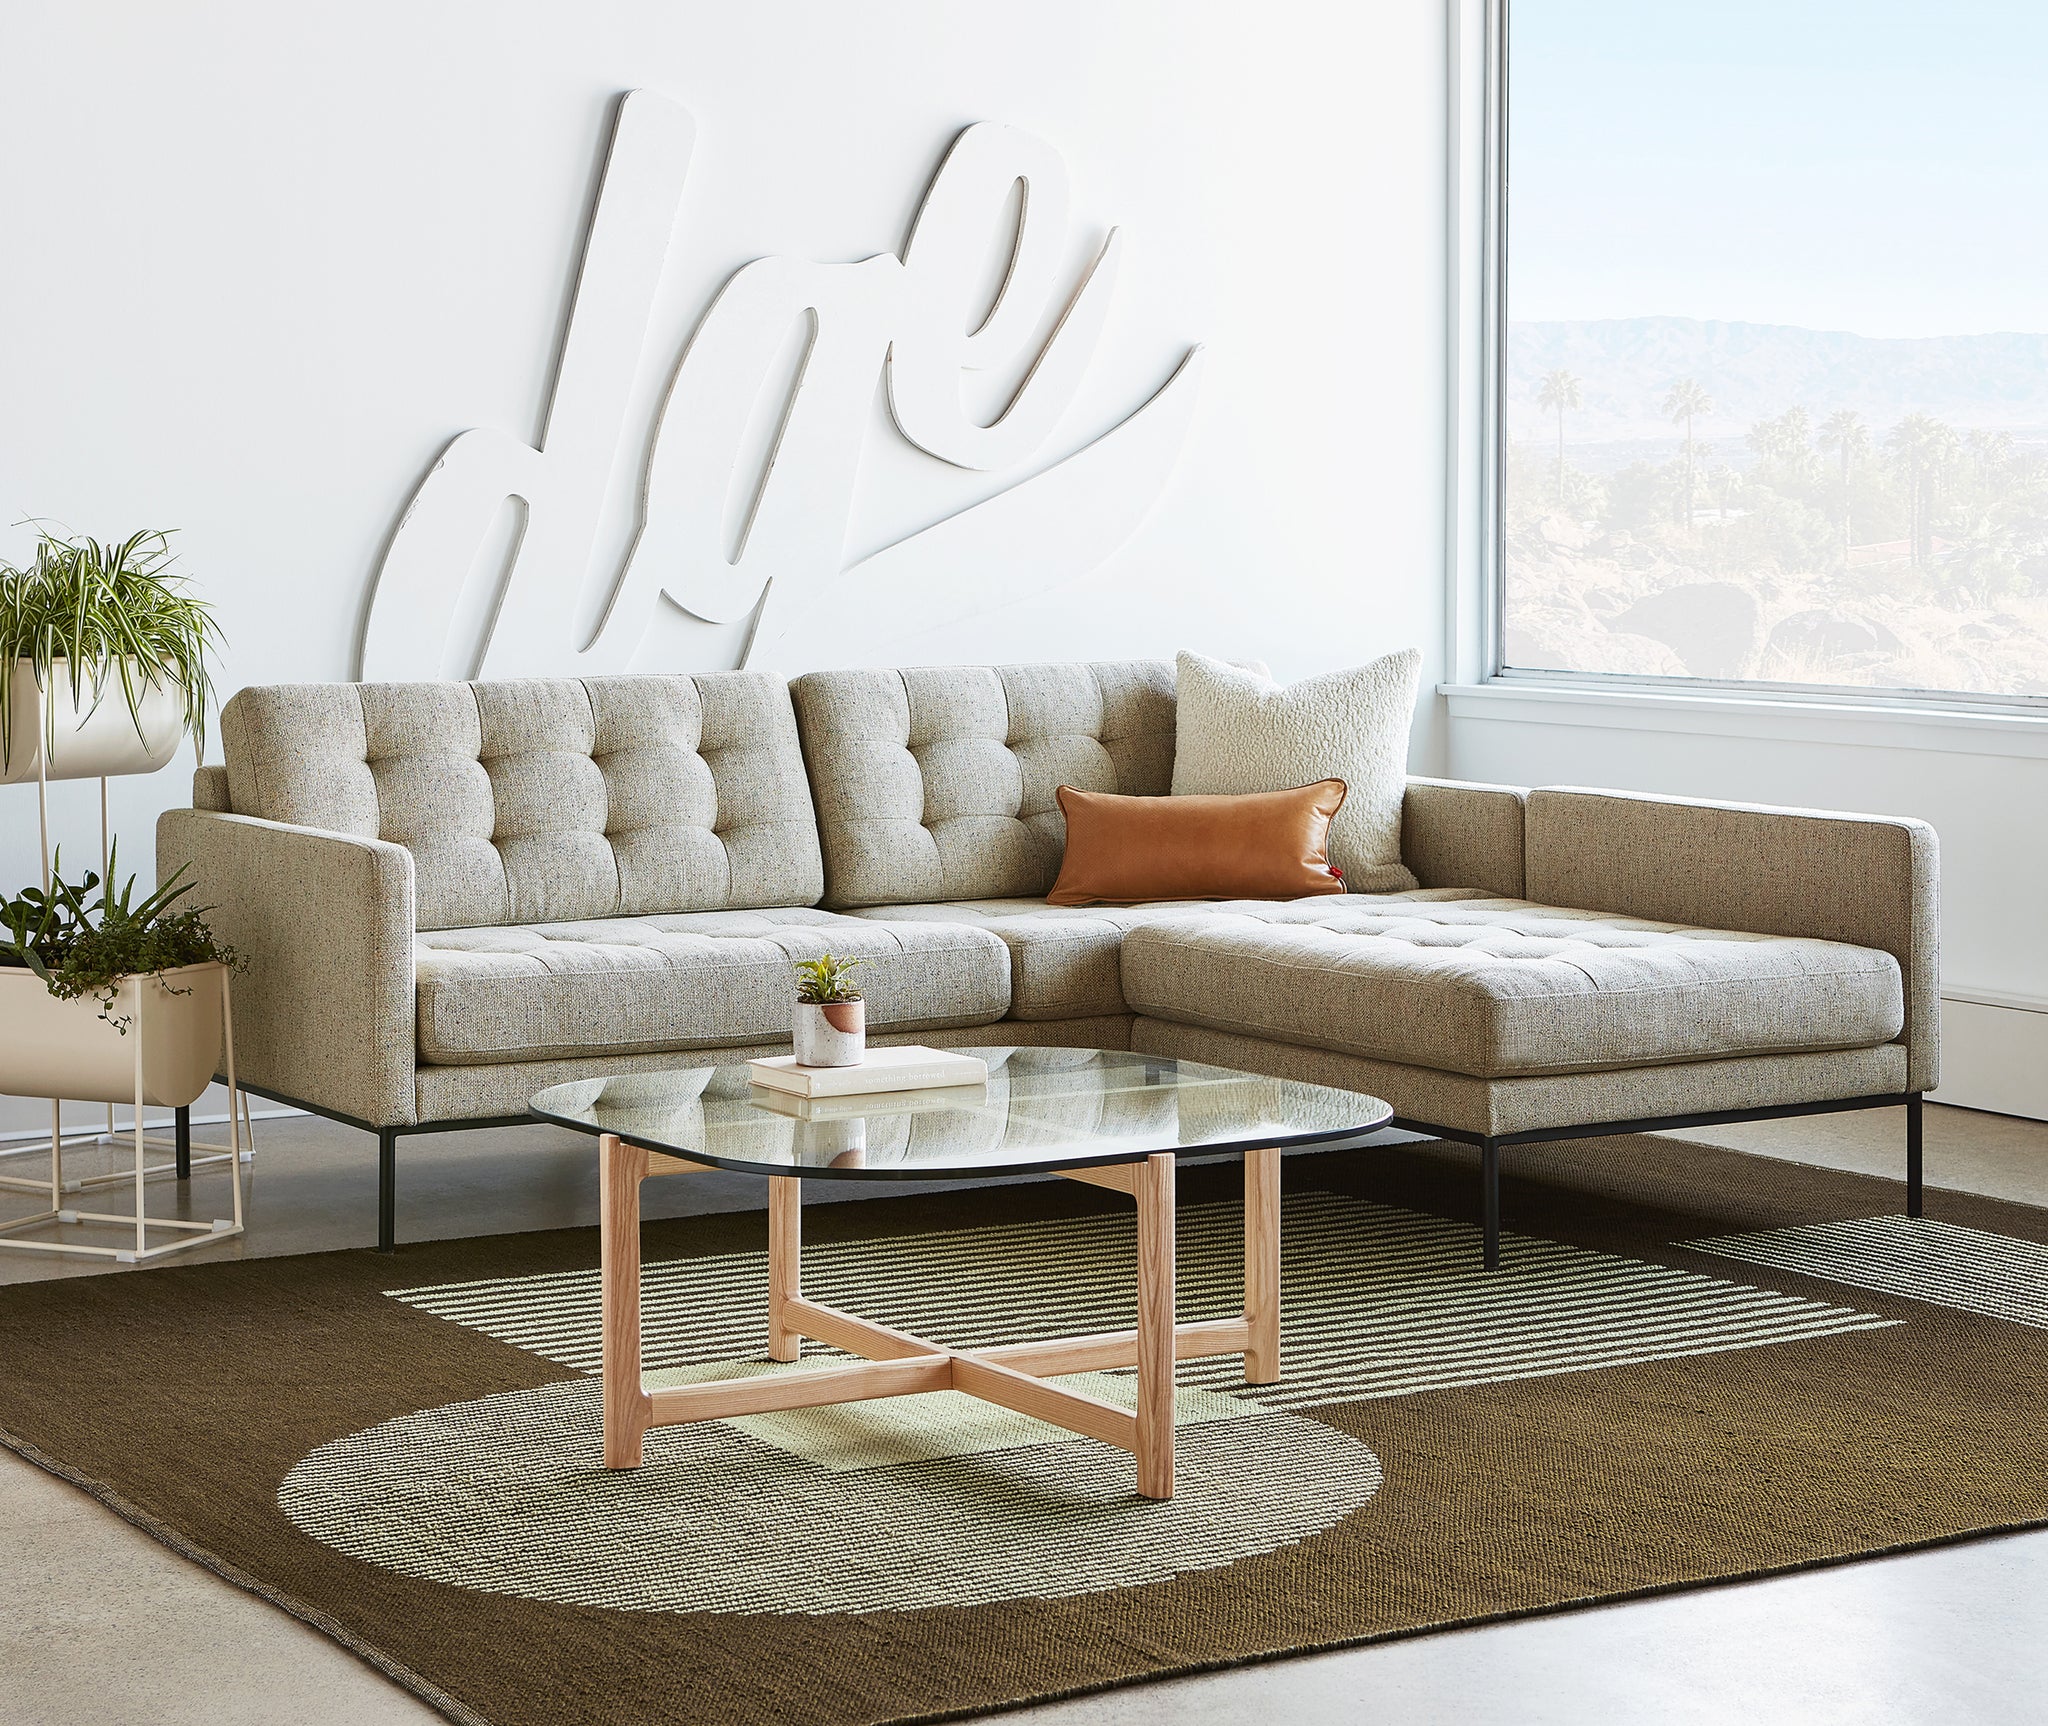 Towne Bi-Sectional - More Options